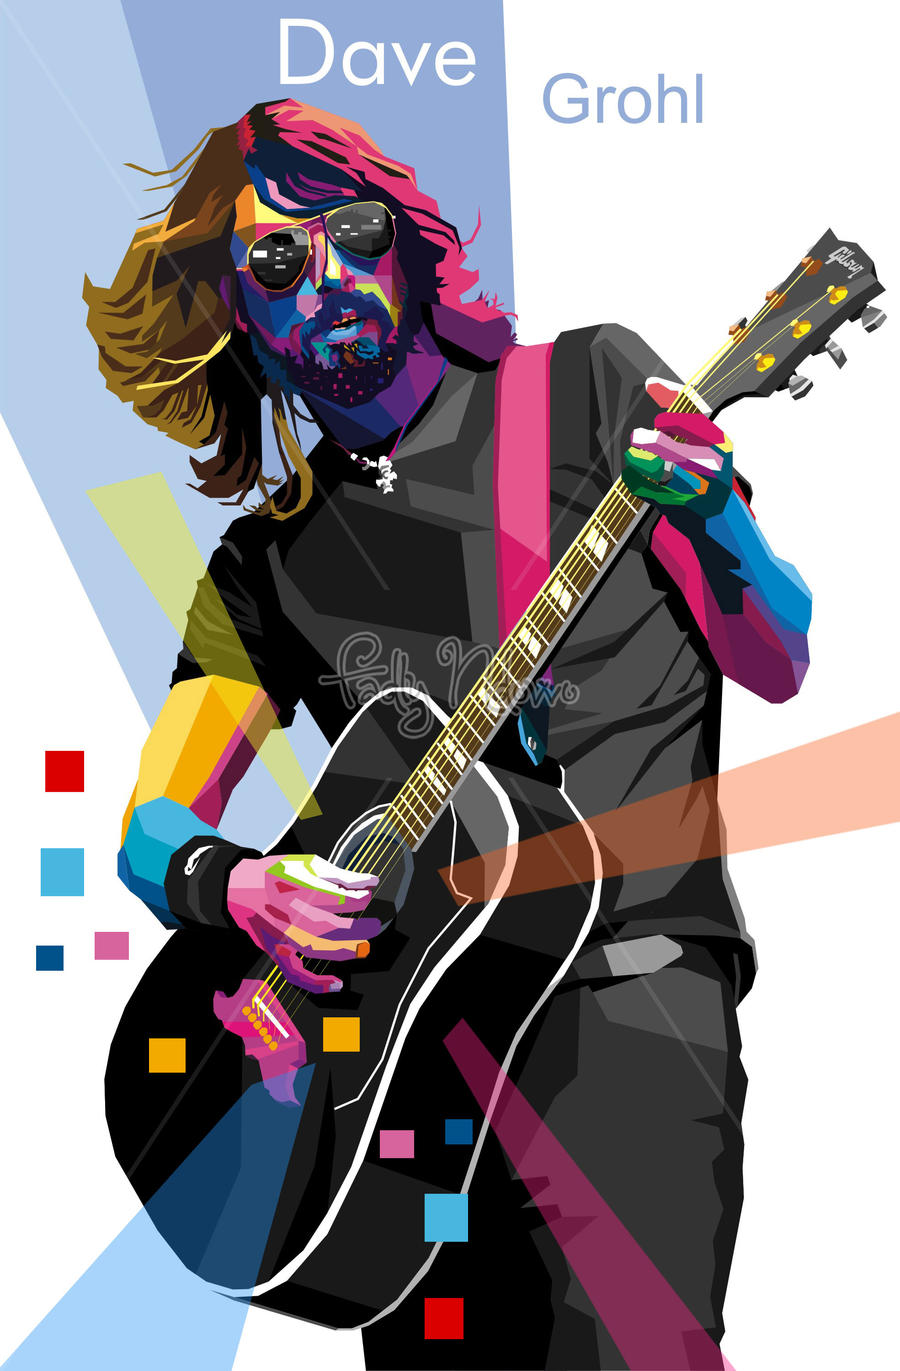 Dave Grohl 2 in WPAP by sangpendosa on DeviantArt